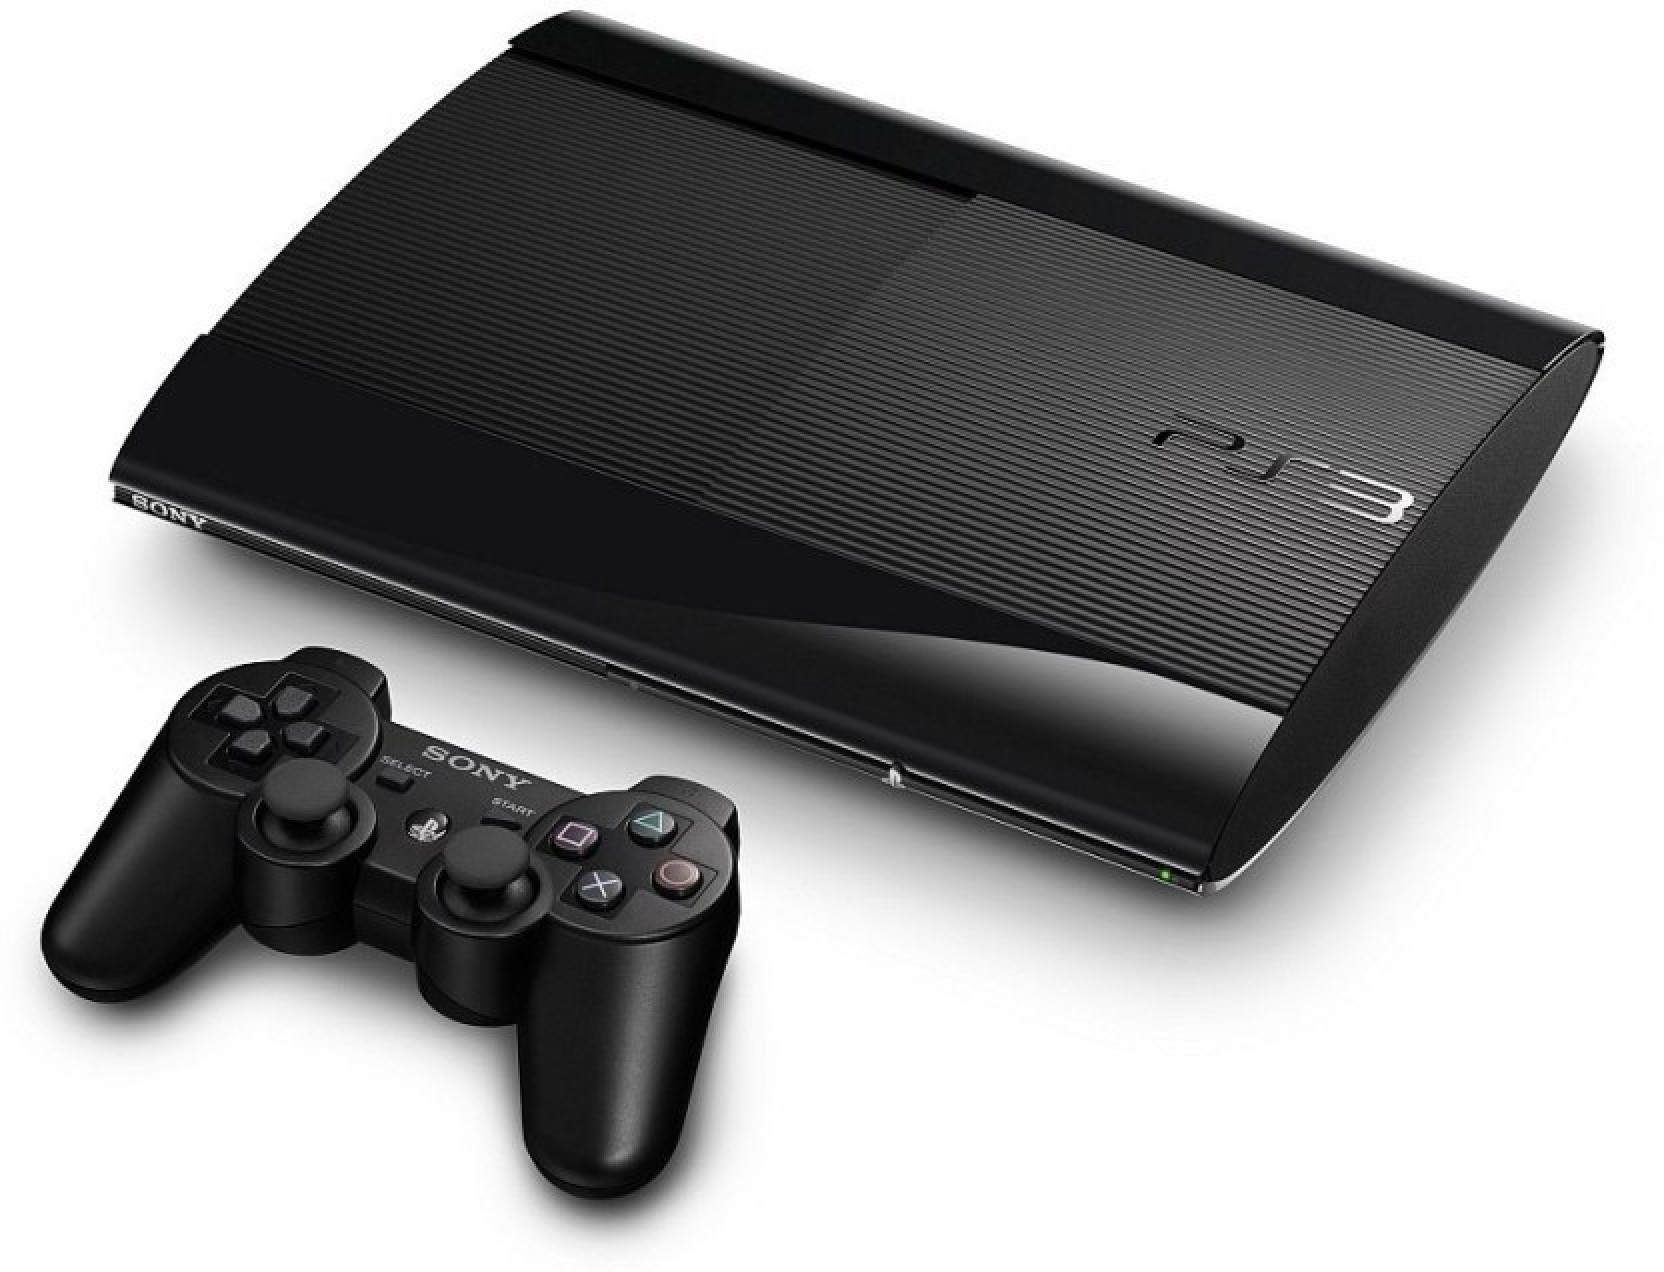 sony-playstation-3-ps3-12-gb-price-in-india-buy-sony-playstation-3